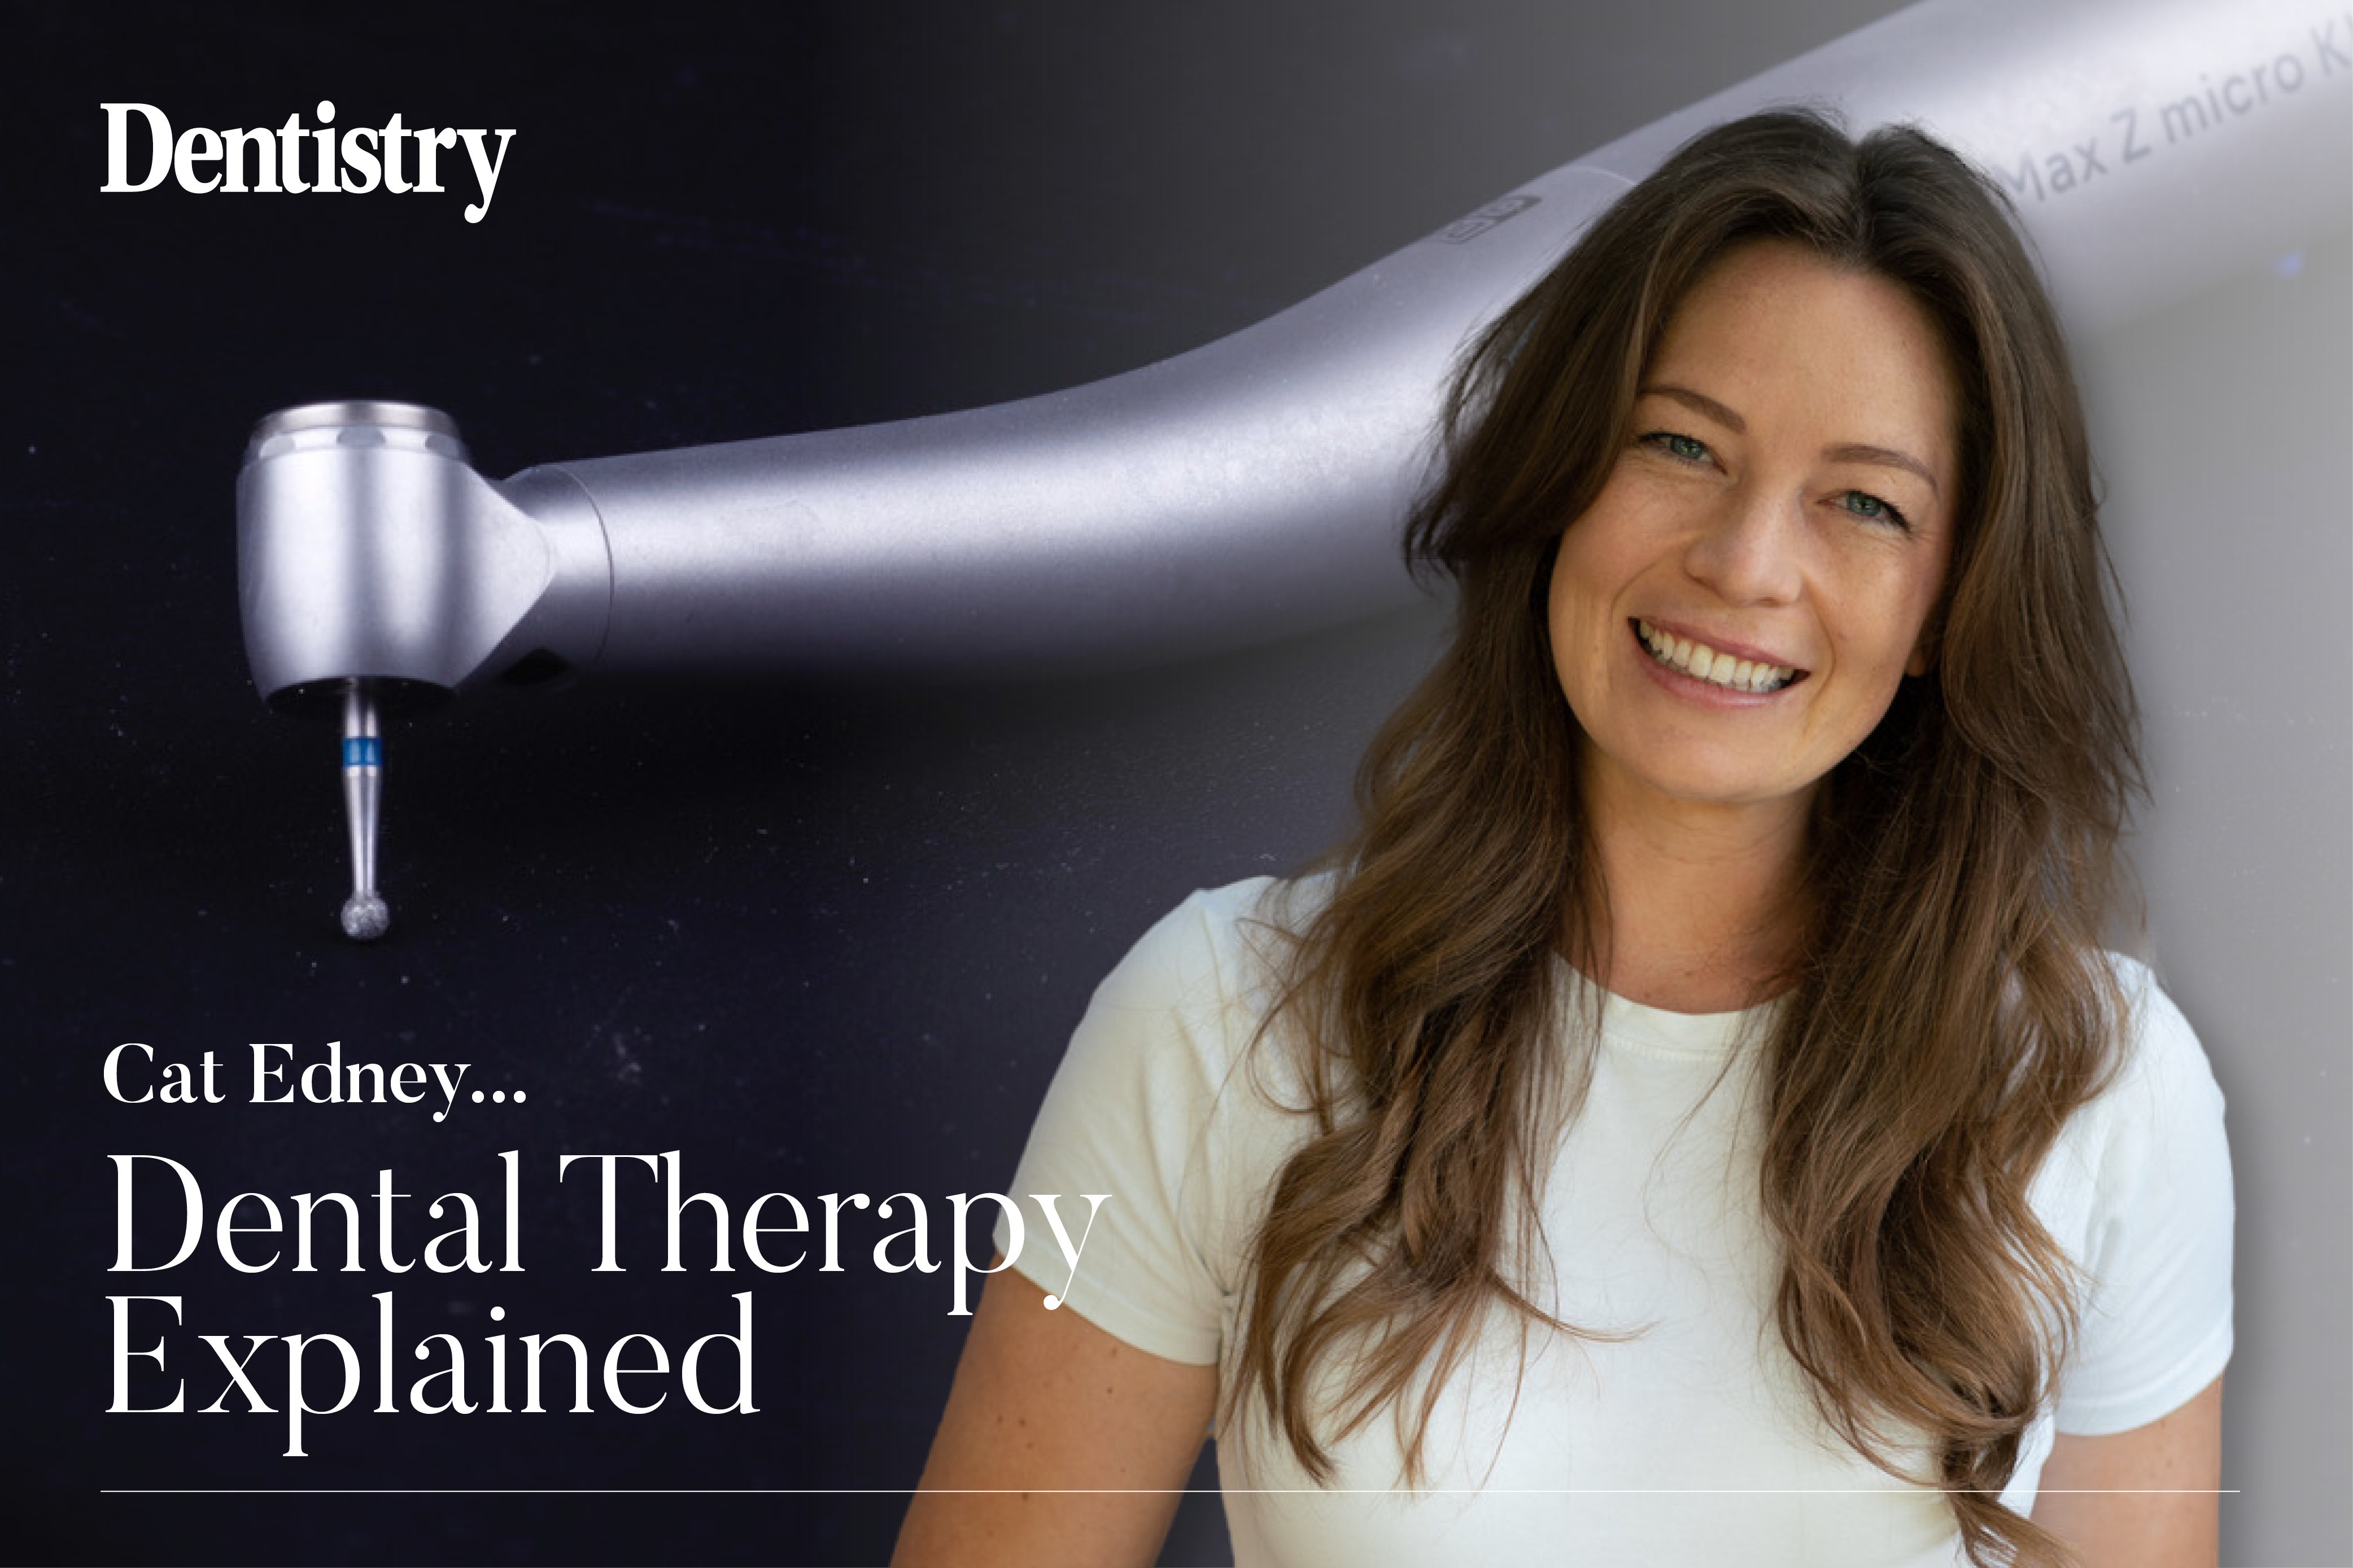 With more practices investing in digital dentistry, Cat Edney discusses the many possibilities of digital dental therapy, and how it can transform the patient experience.